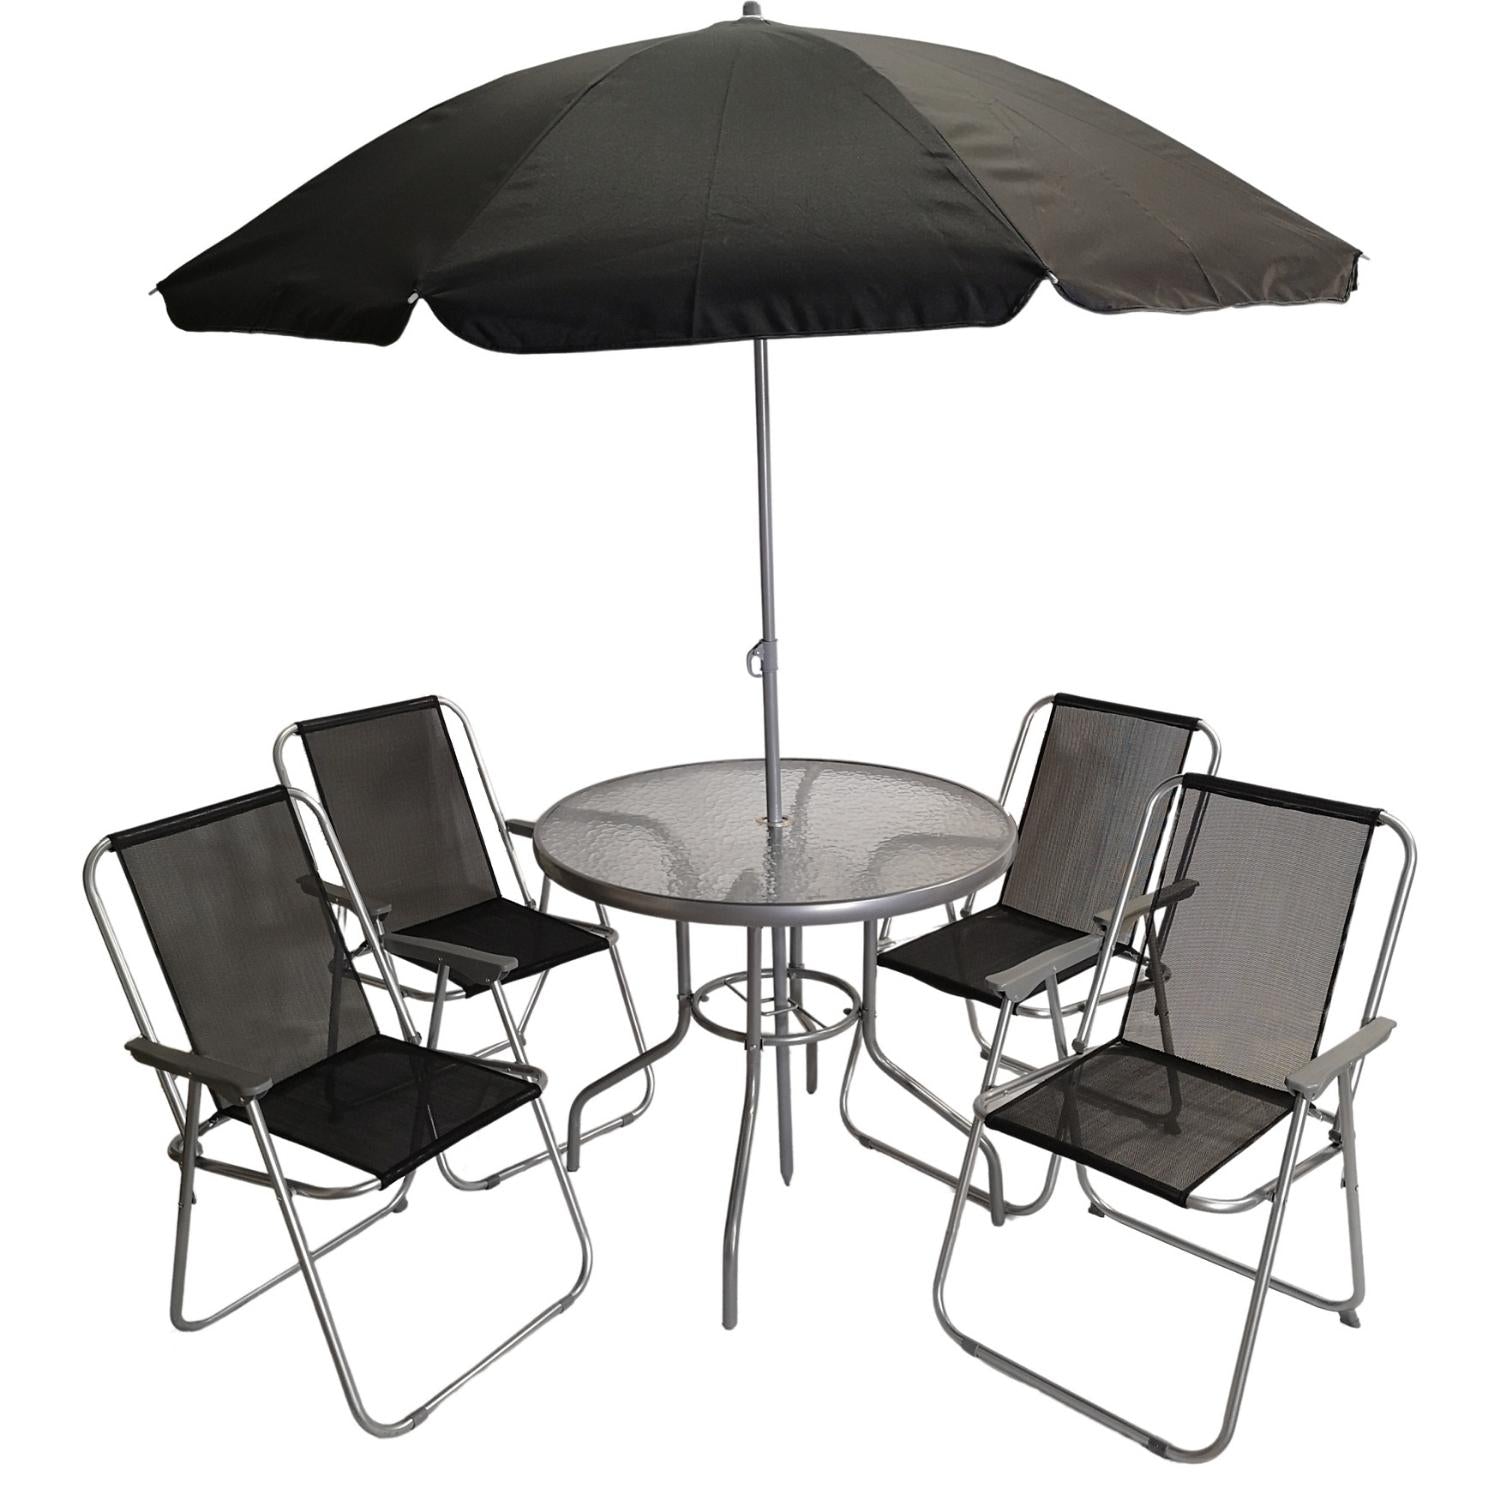 4 Person Textoline Garden Furniture Patio Set 4 Chairs And Parasol